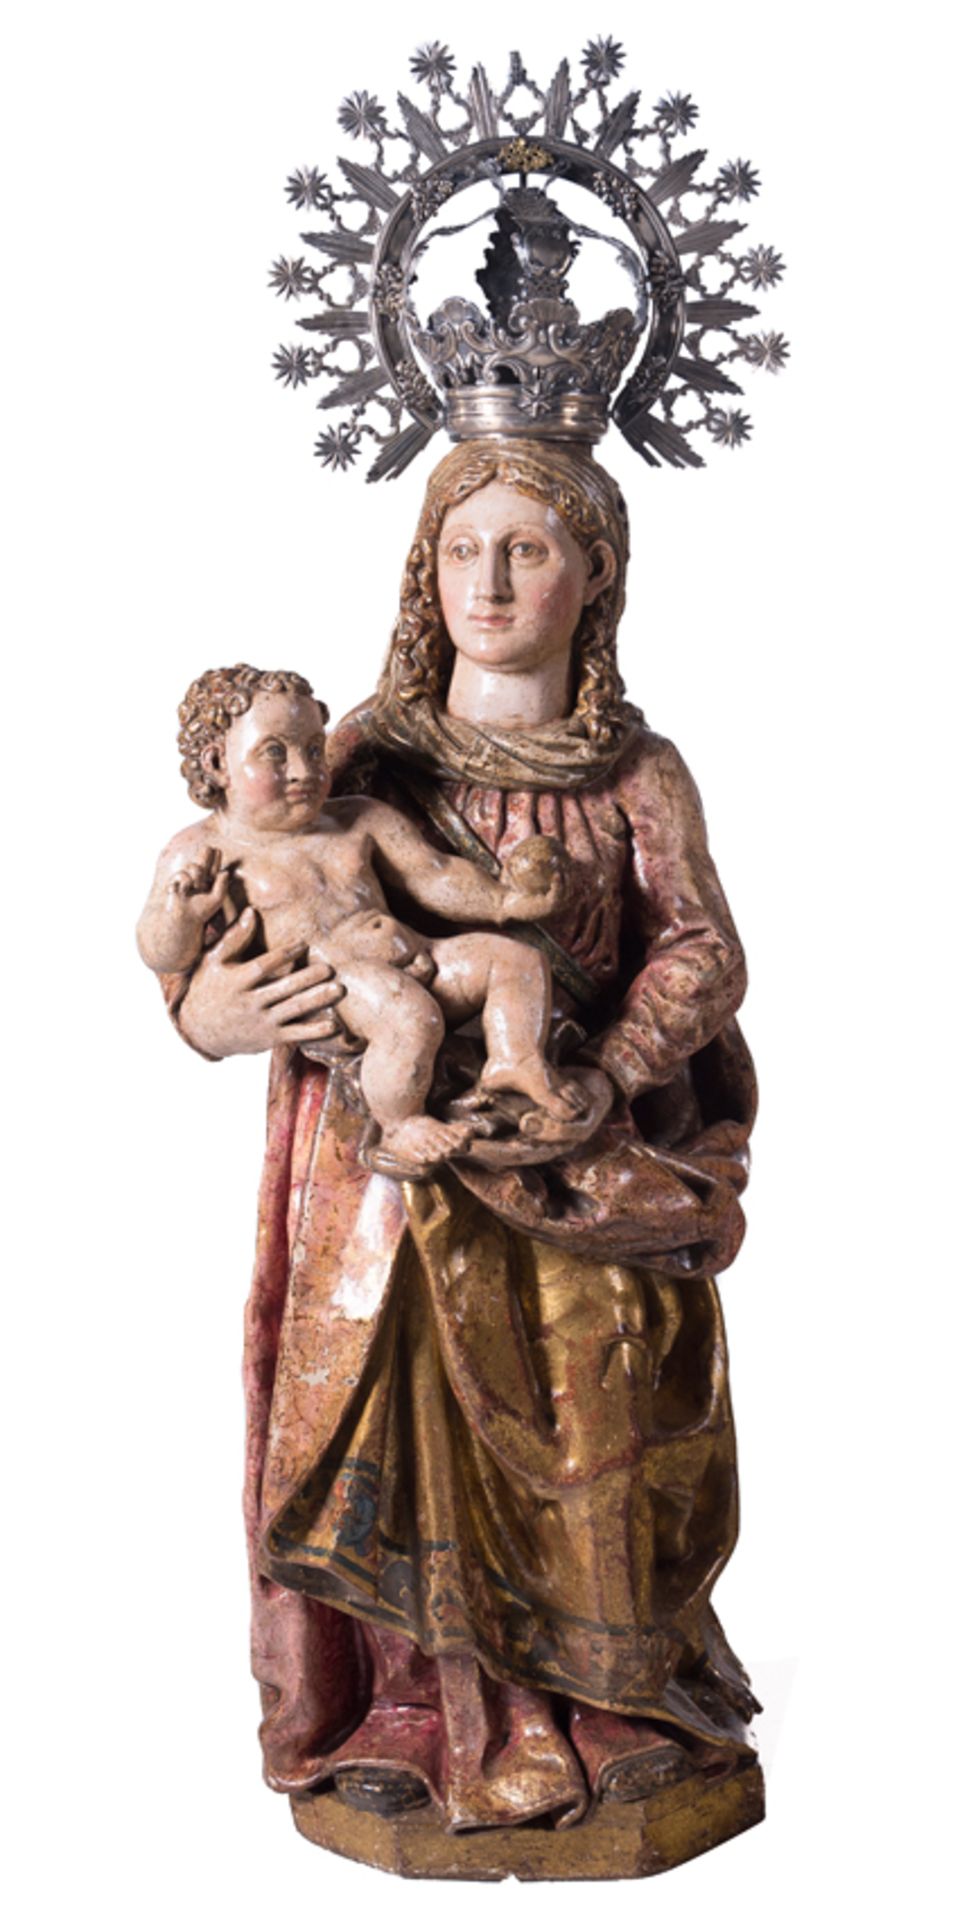 "Madonna and Child". Carved and polychromed wooden sculpture with a silver crown. Spanish School. 17